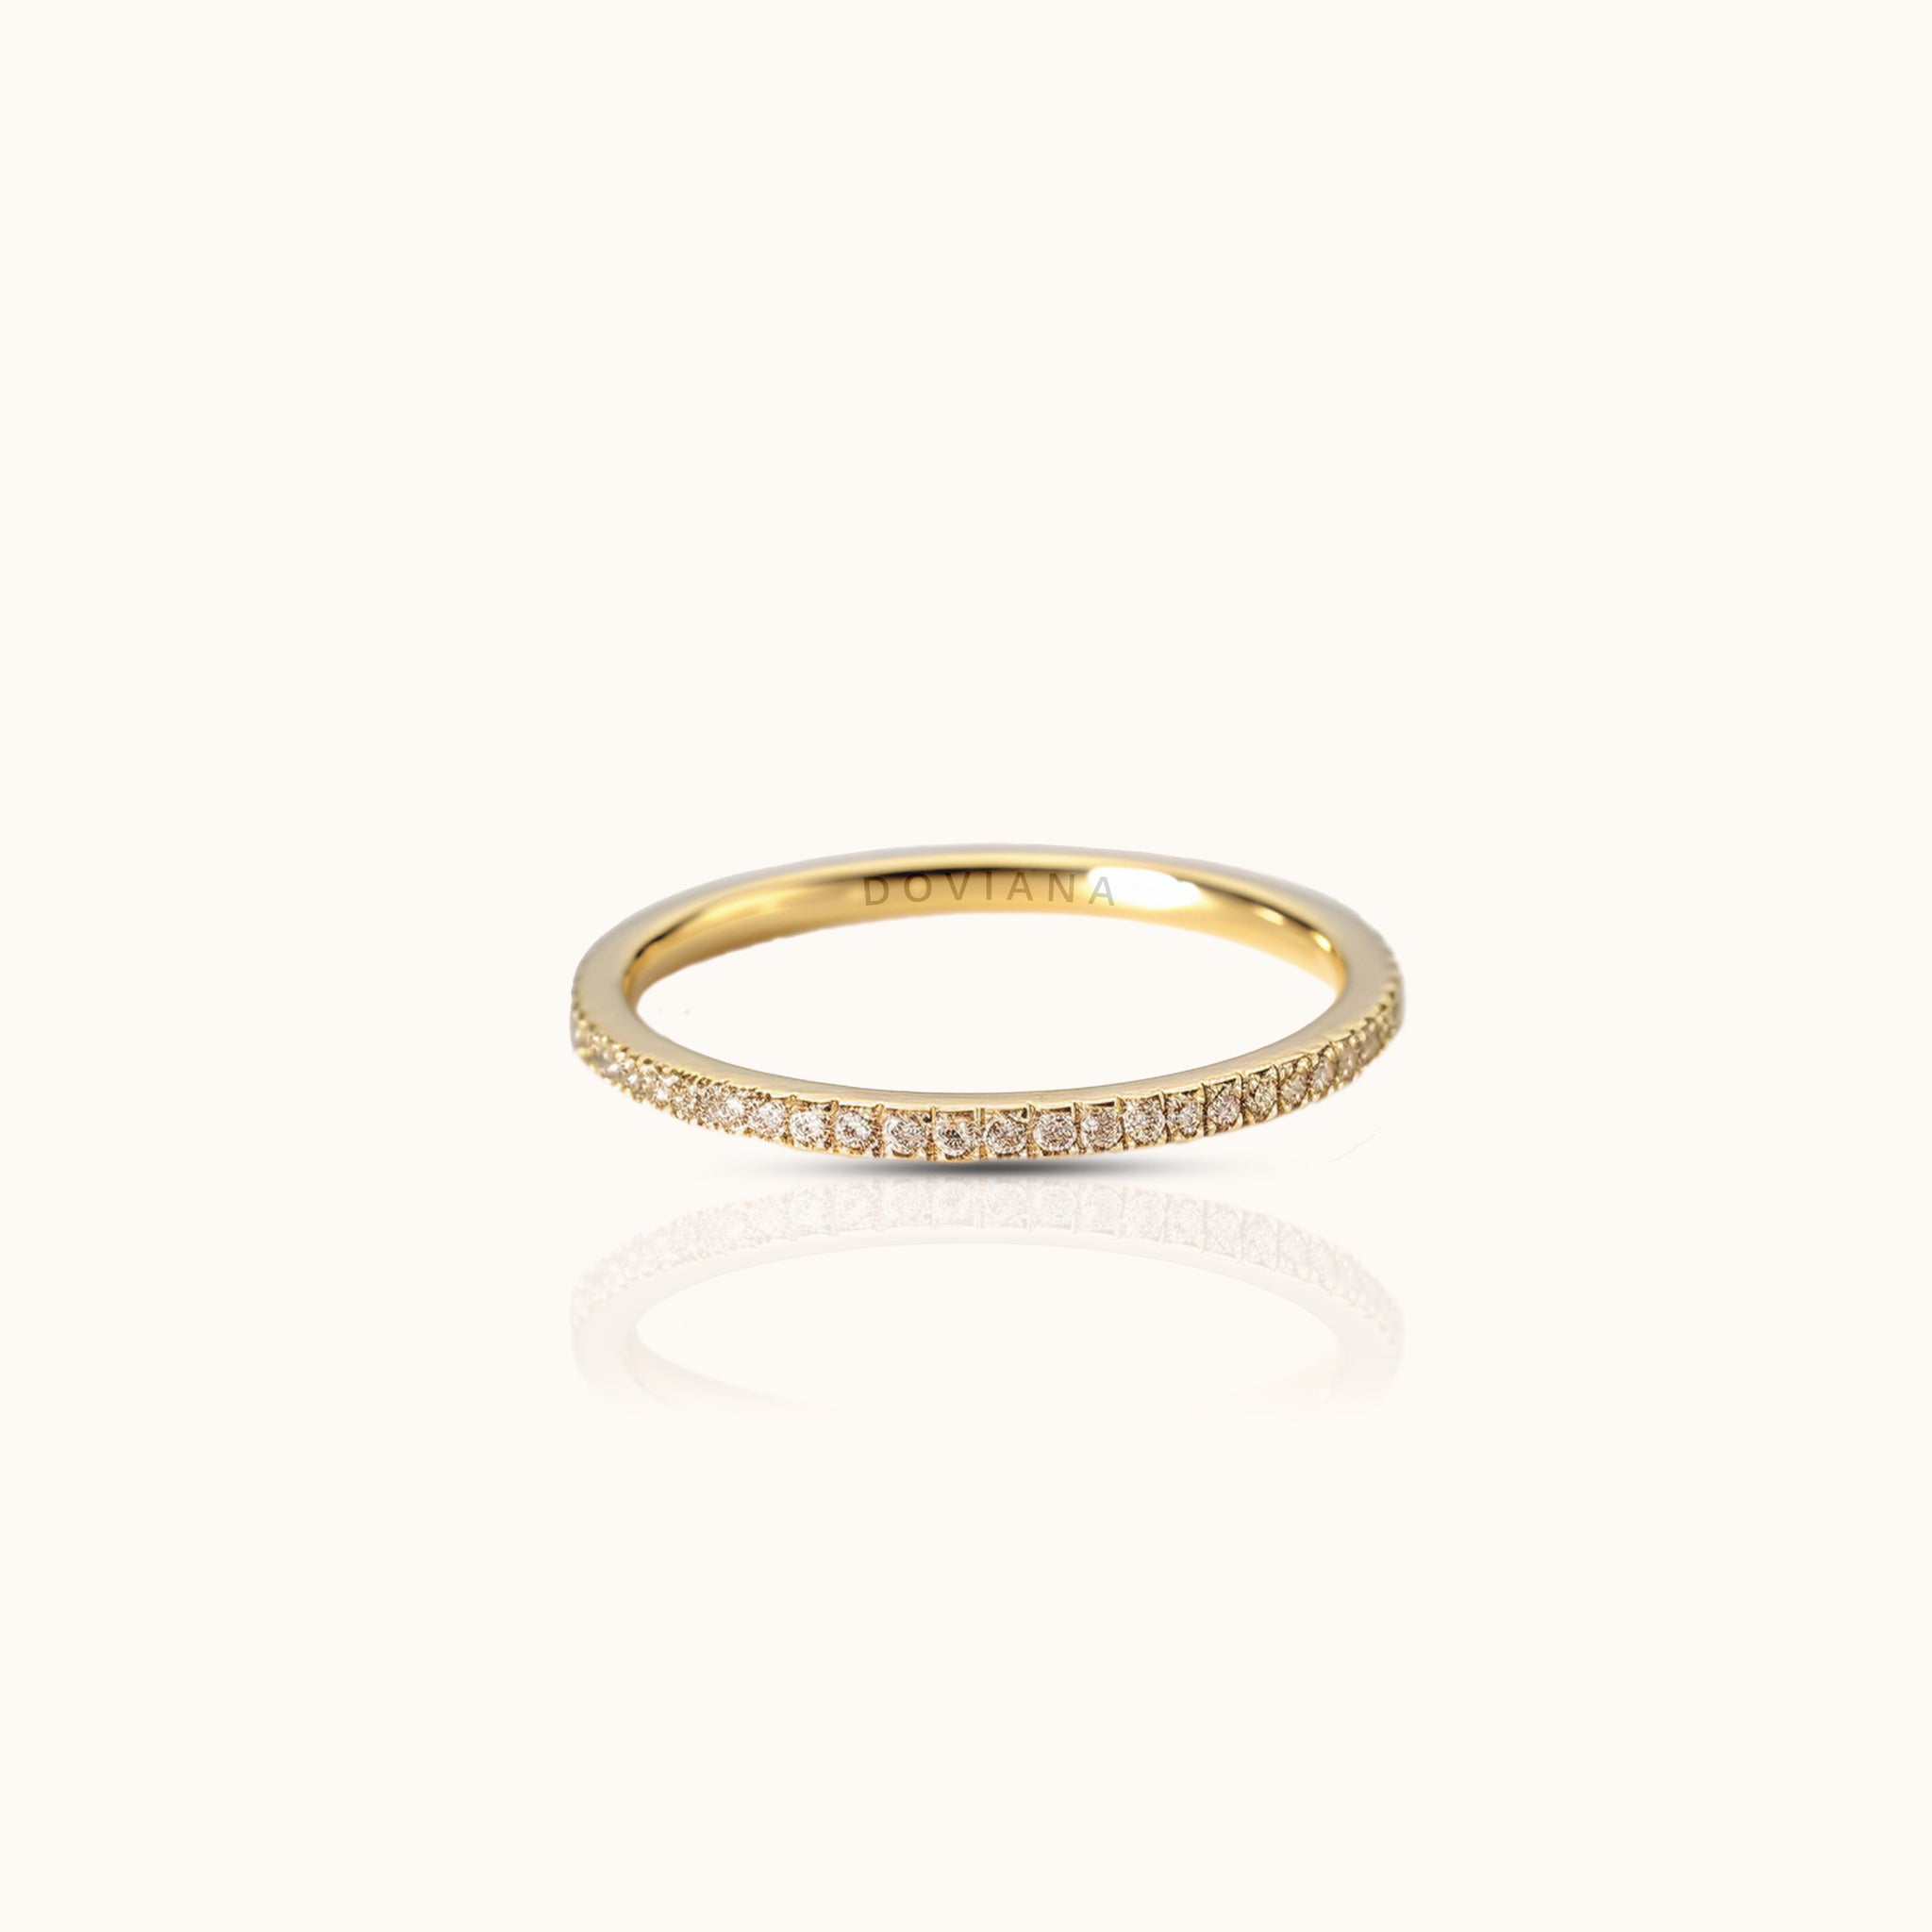 CZ Pave Eternity Band Titanium PVD Gold Ring by DOVIANA